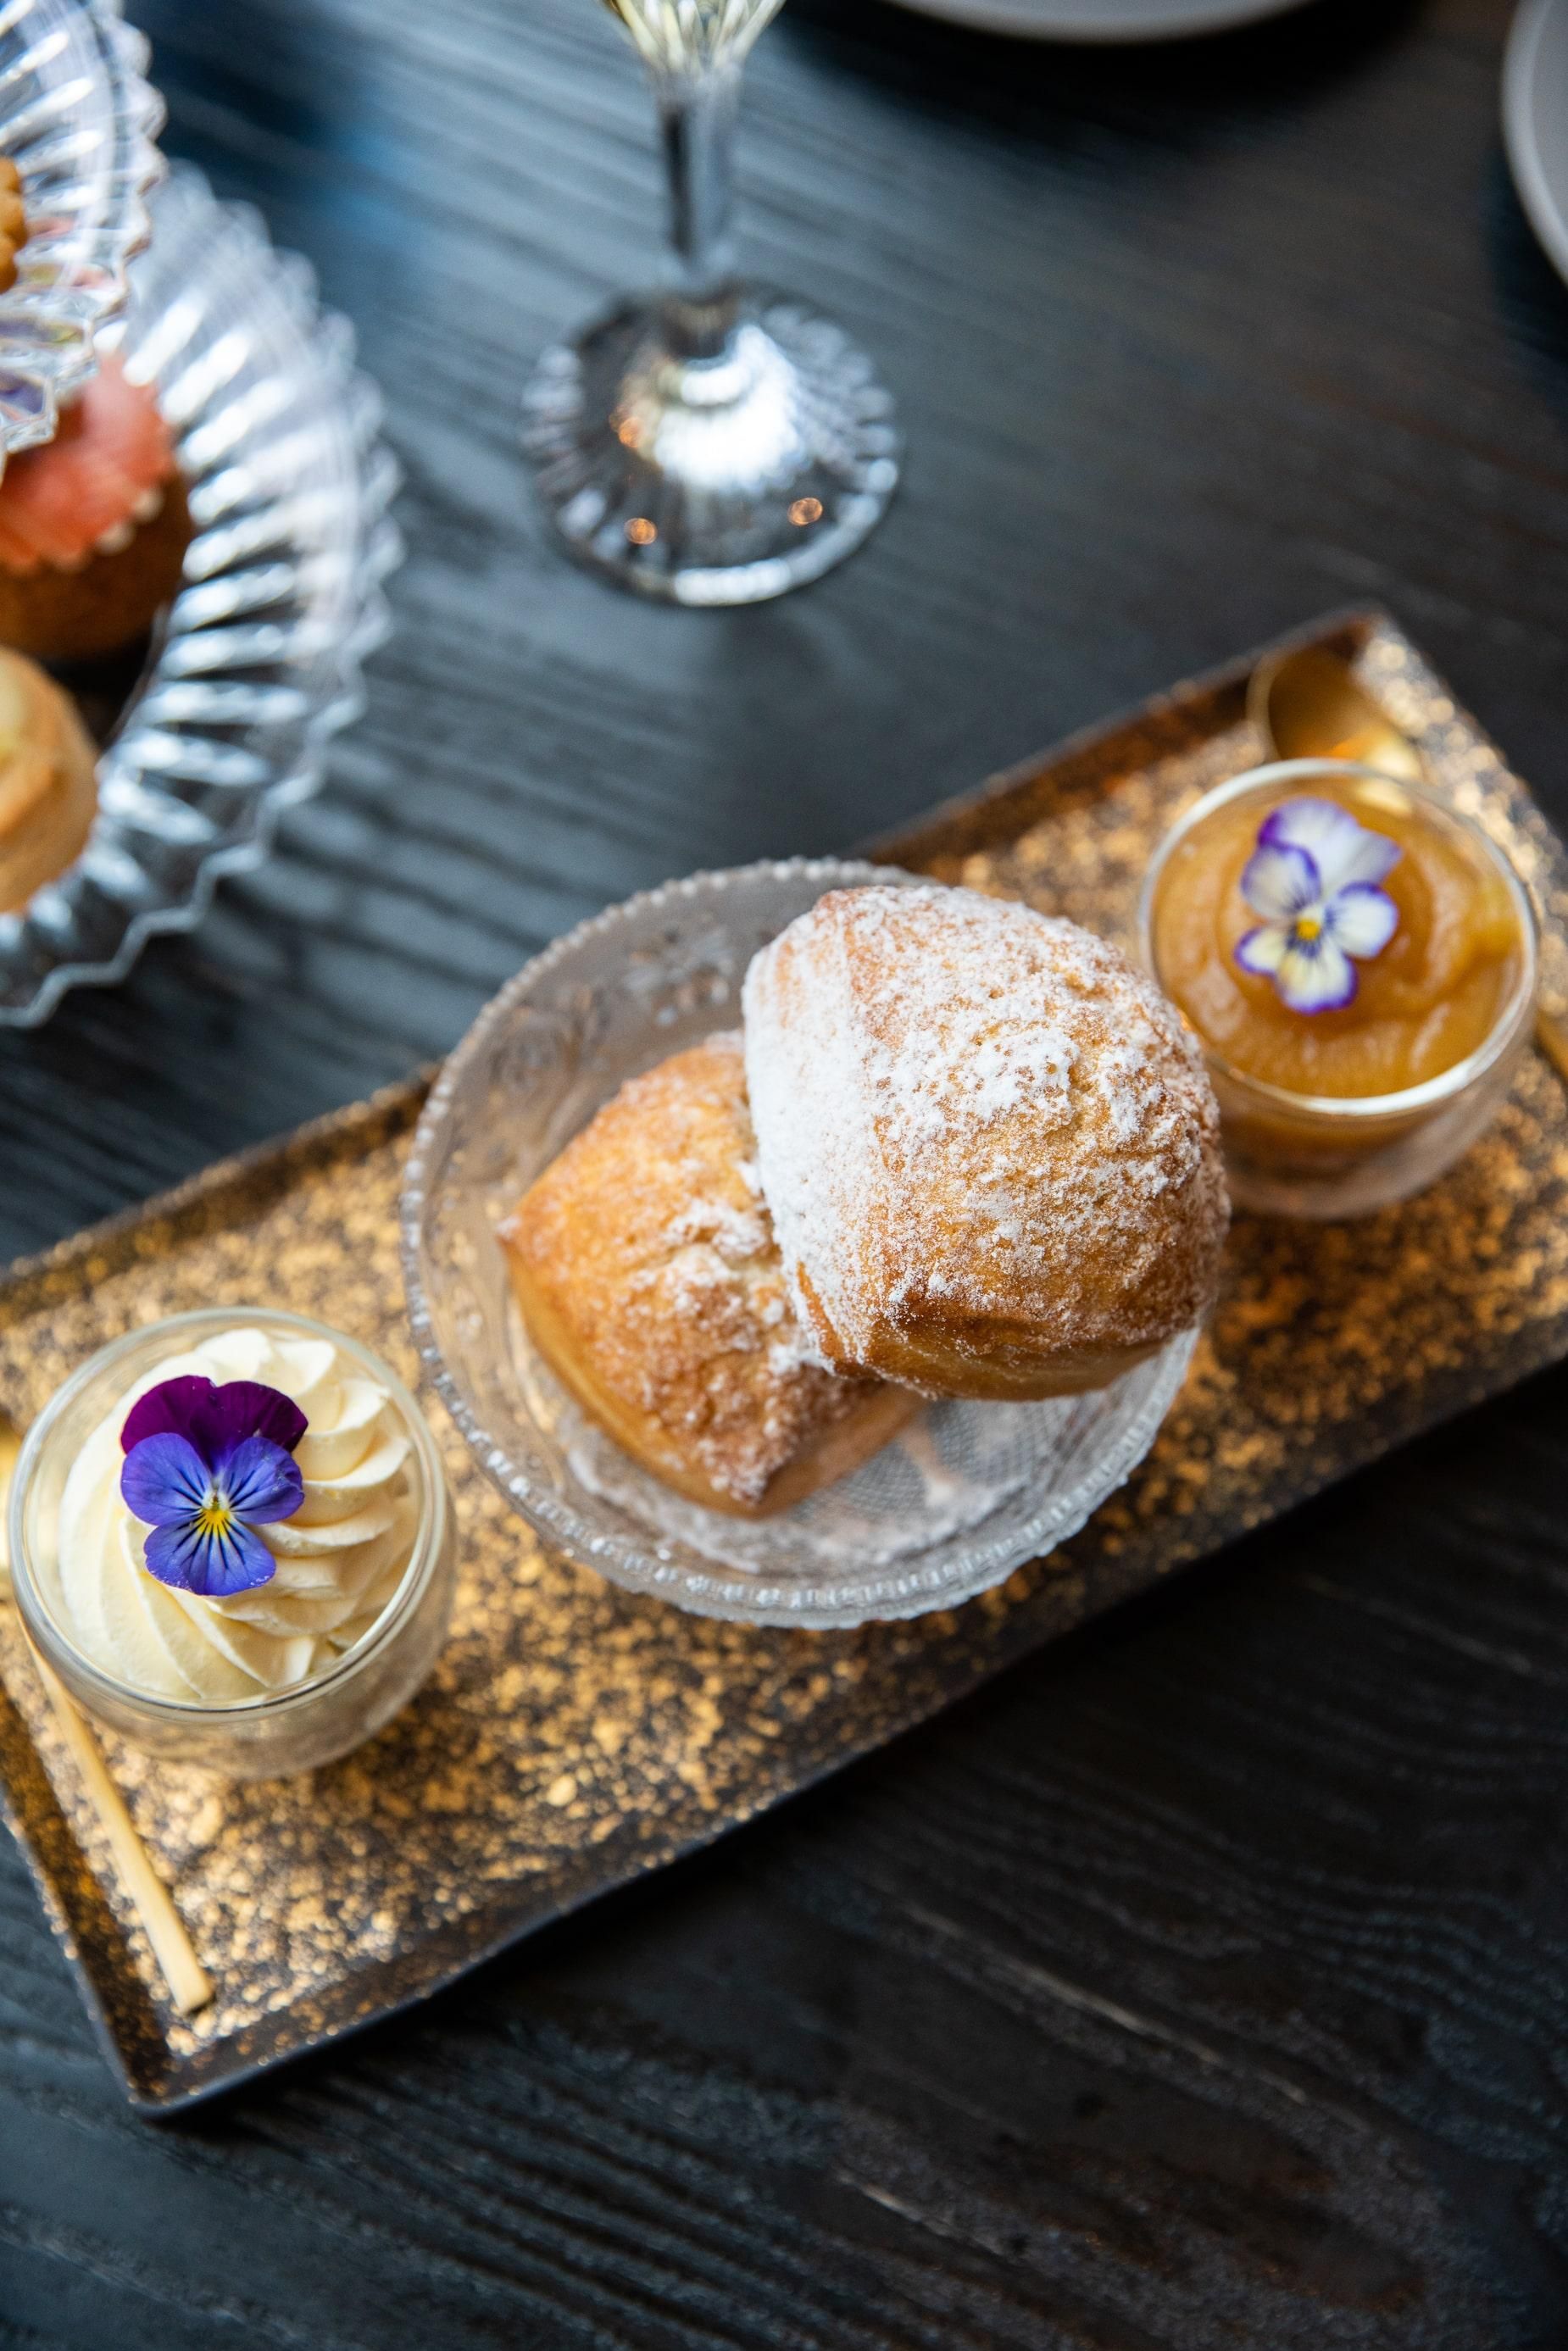 Scone Recipe at Baccarat New York